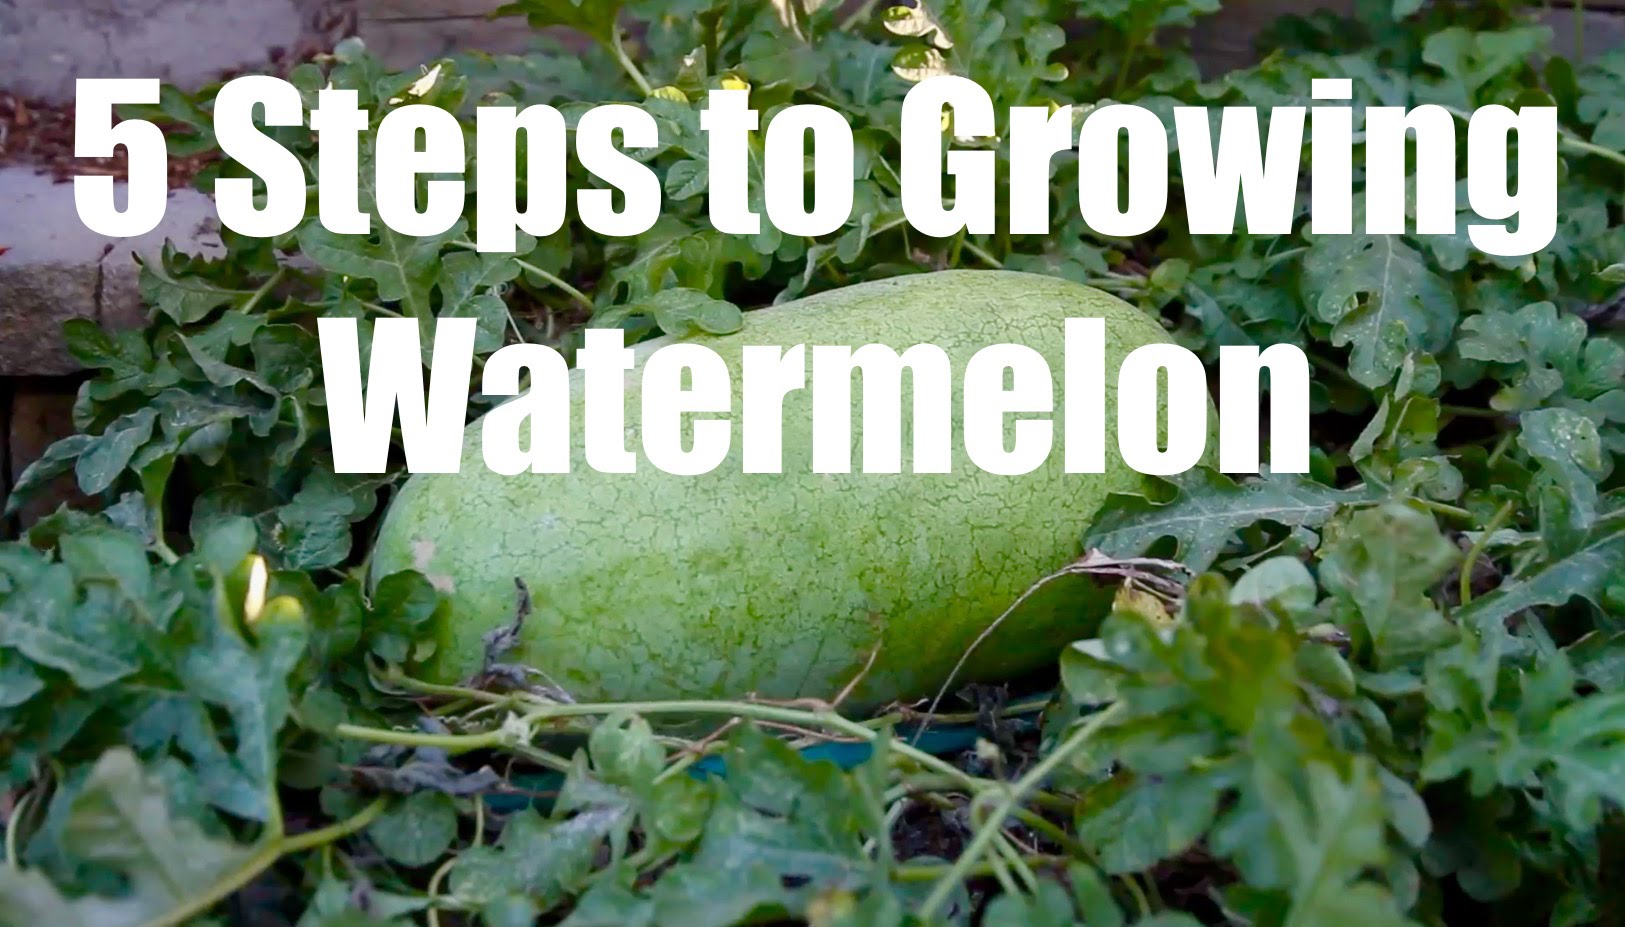 5 Steps to Growing Watermelon (Video)